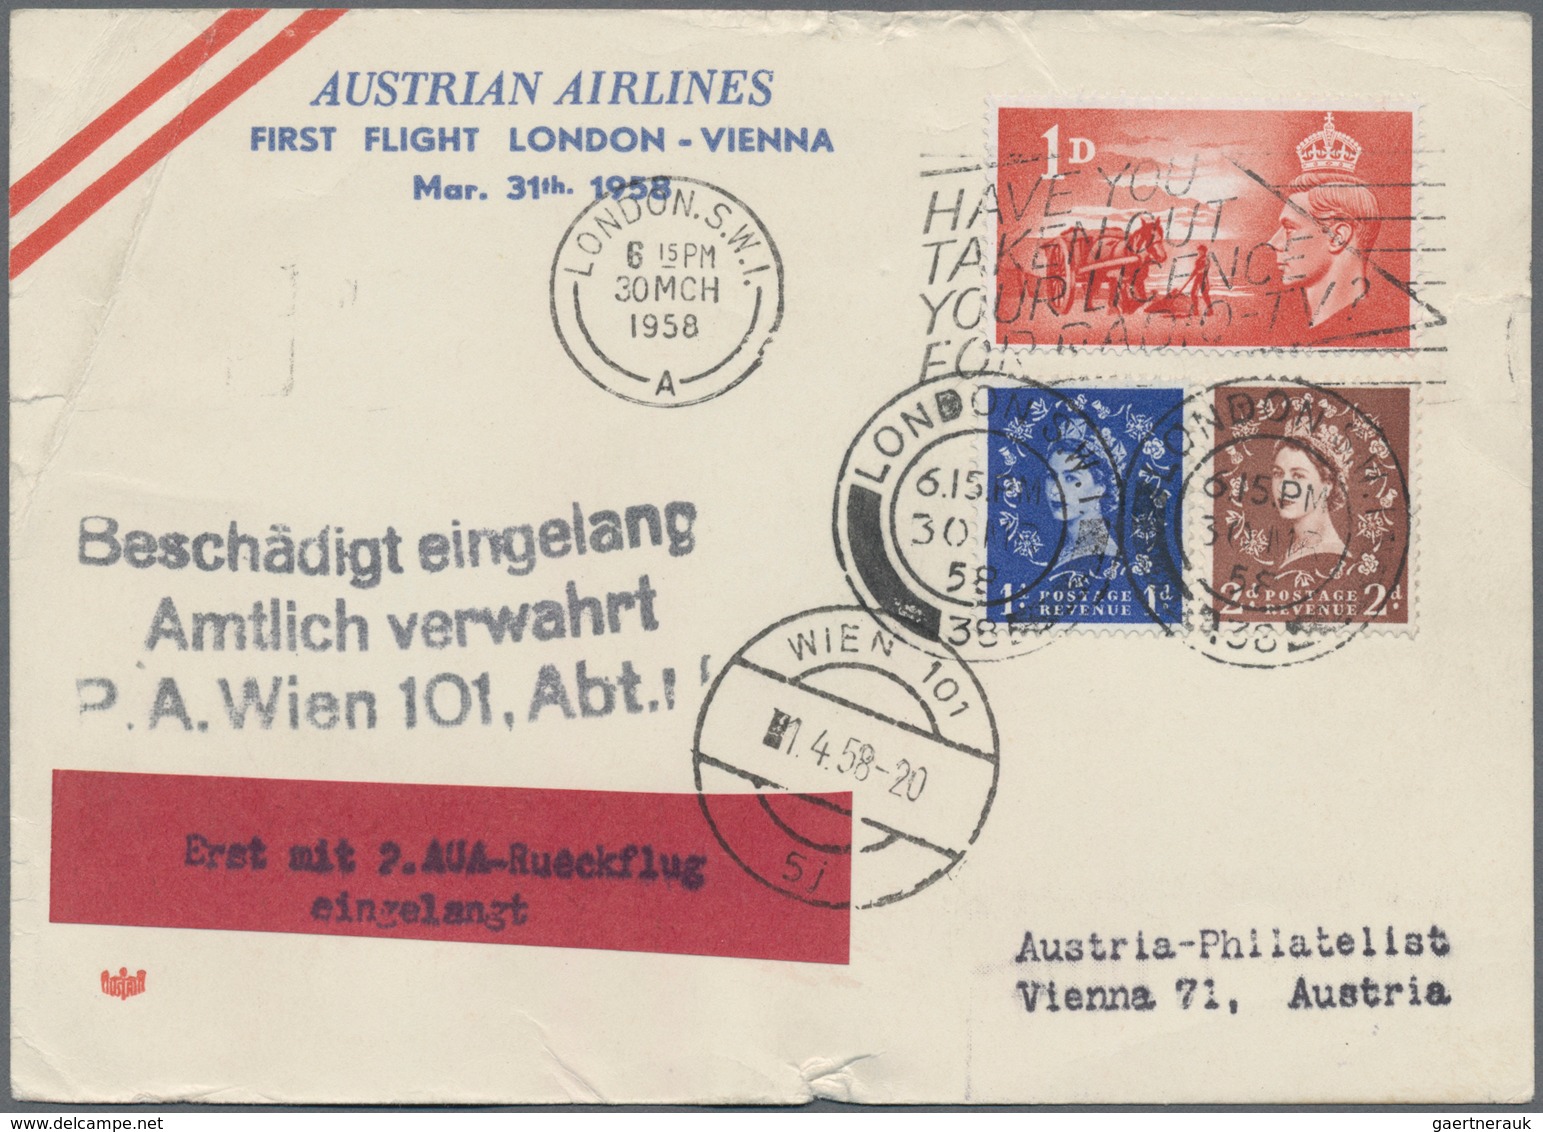 Flugpost Europa: 1932/1972, lot of apprx. 94 flight covers/cards, incl. first and special flights, h